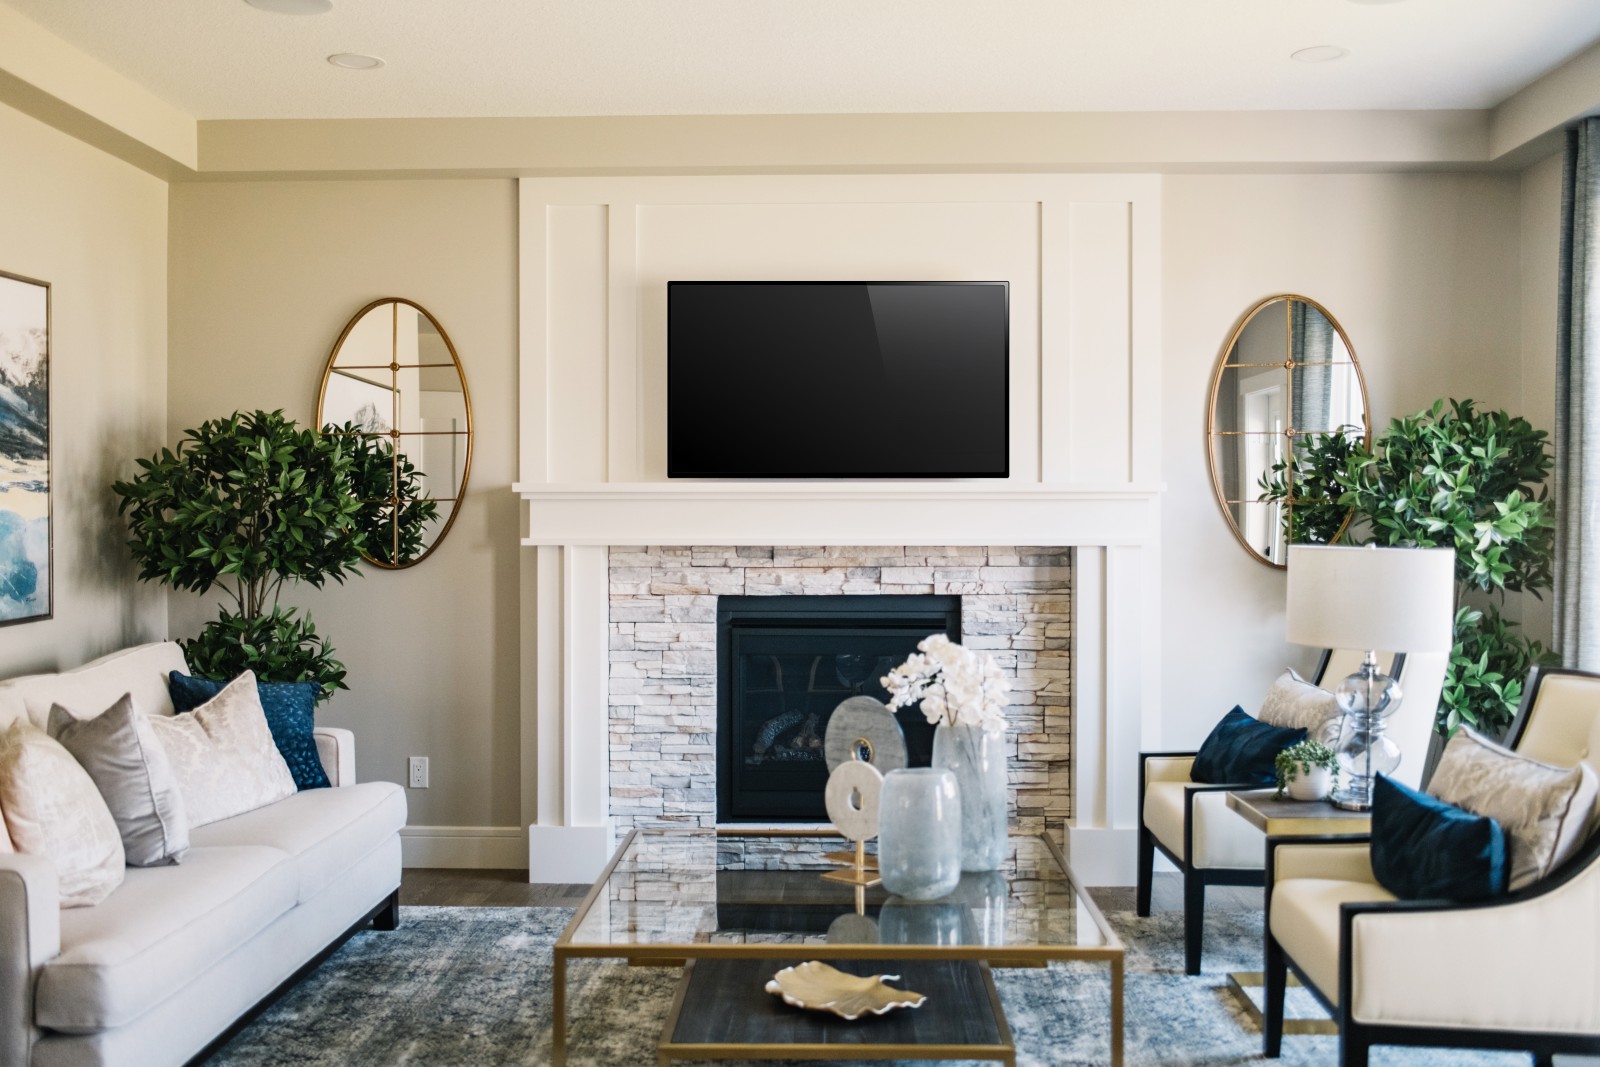 Traditional great room in the Julian showhome with stone surround on fireplace and traditional surround with complementing wall panel above mantel